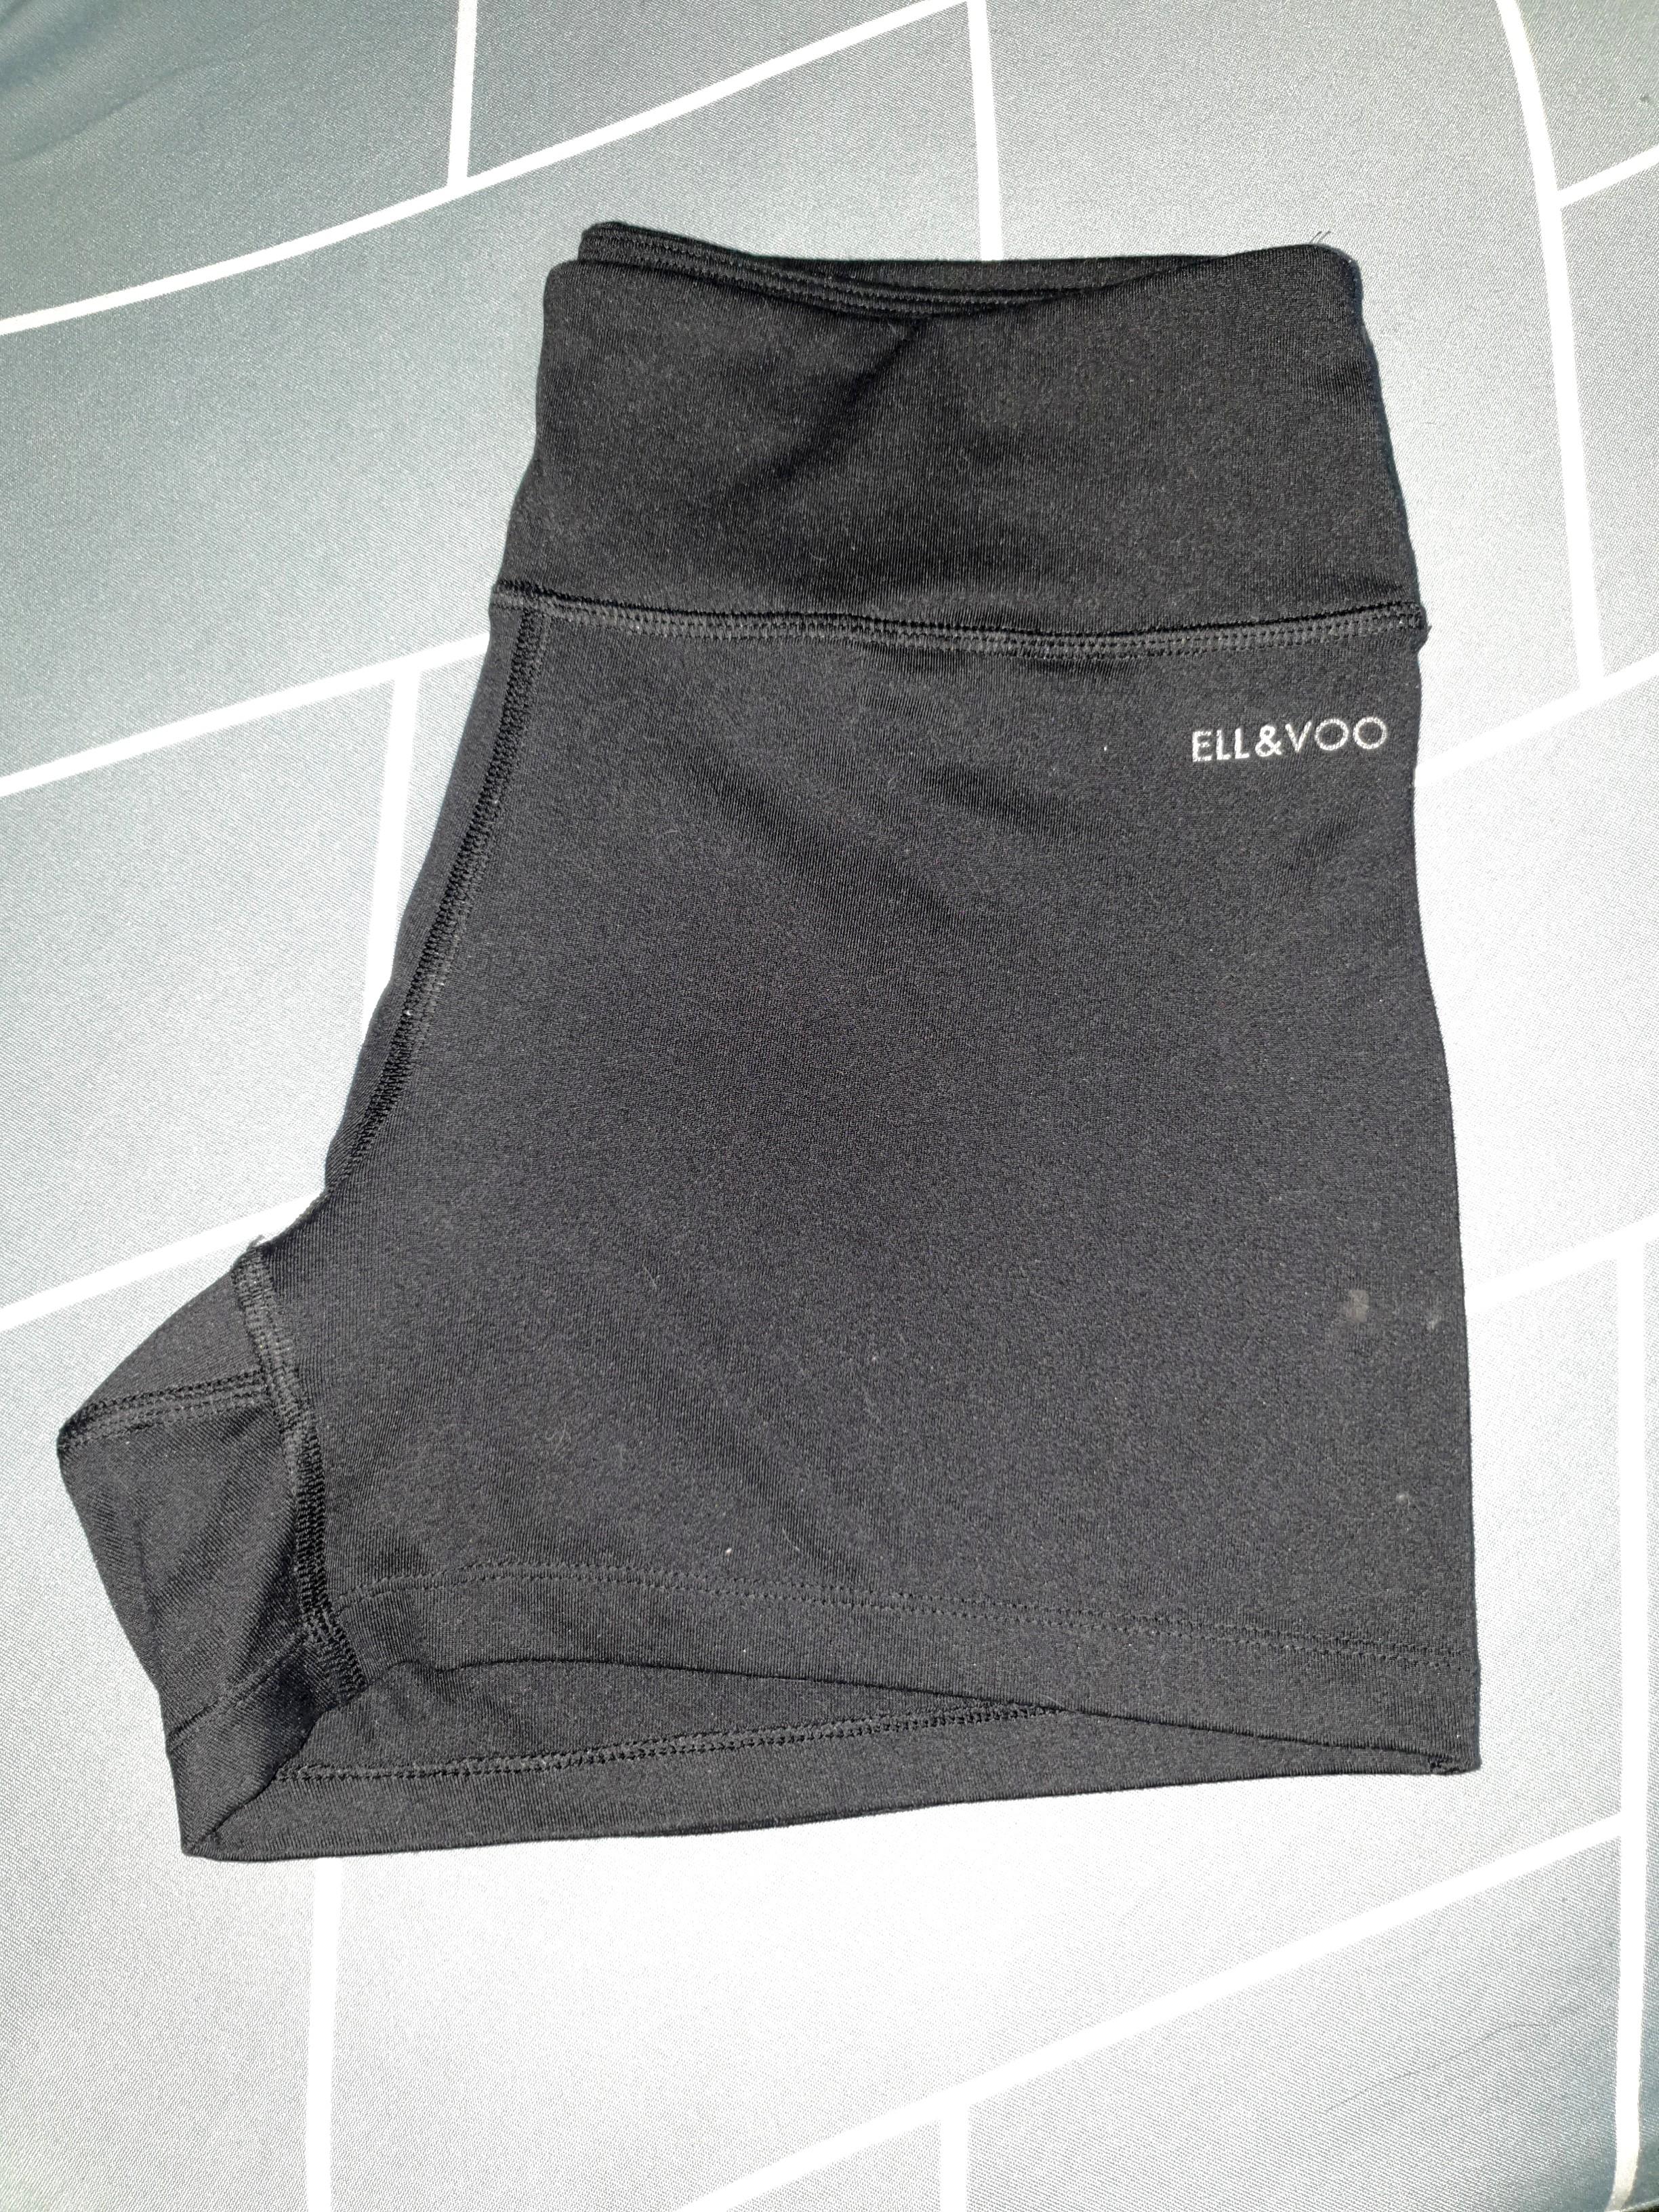 Ell & Voo Gym Shorts, Women's Fashion, Activewear on Carousell